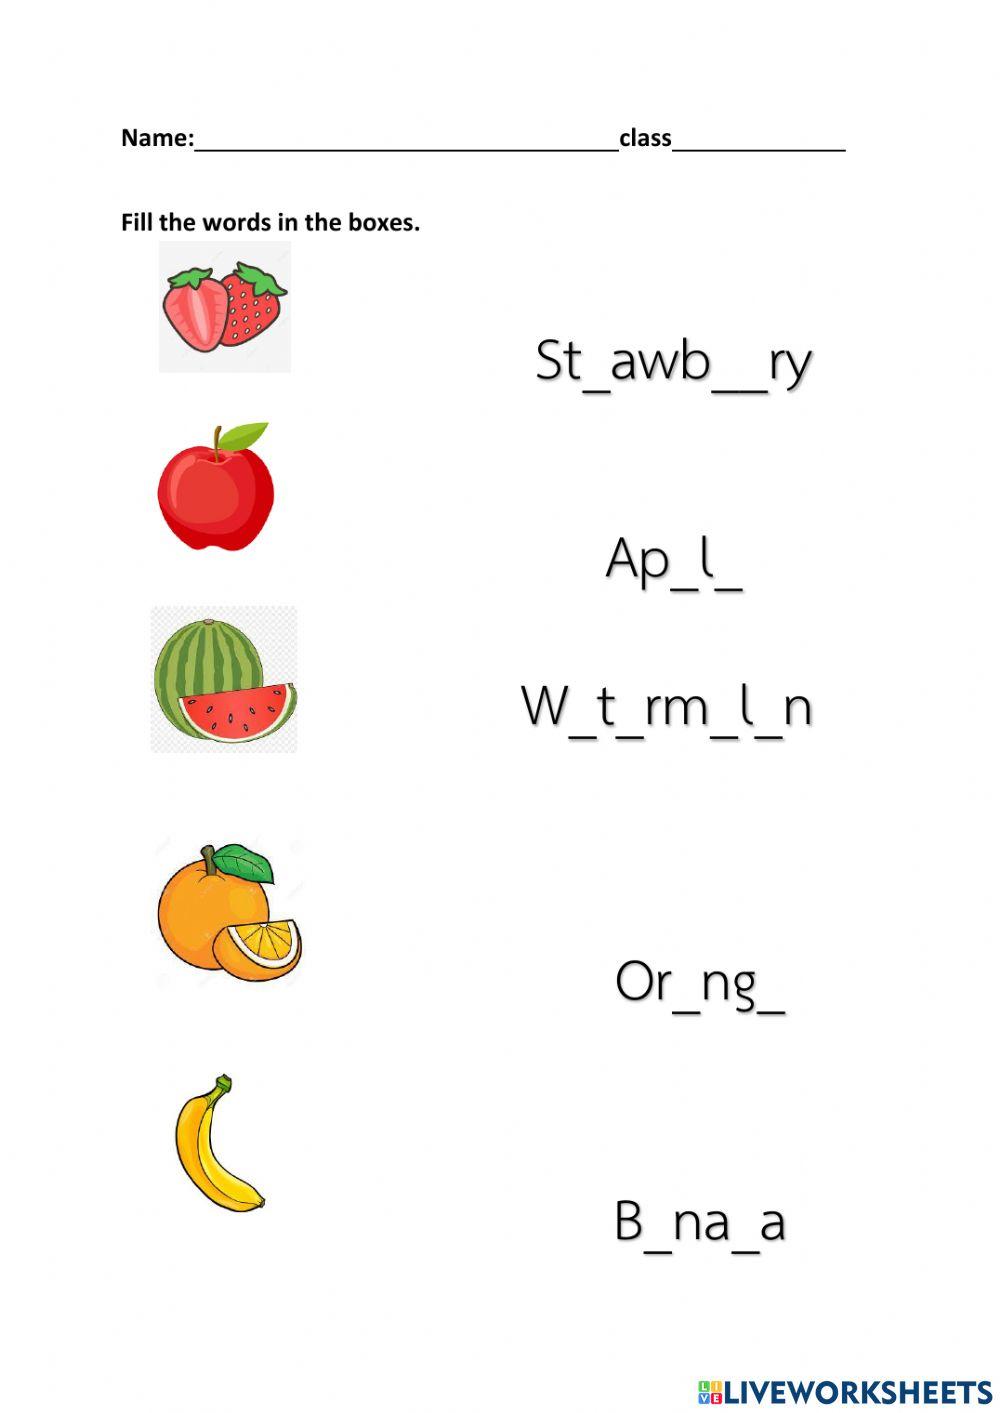 Words for fruits